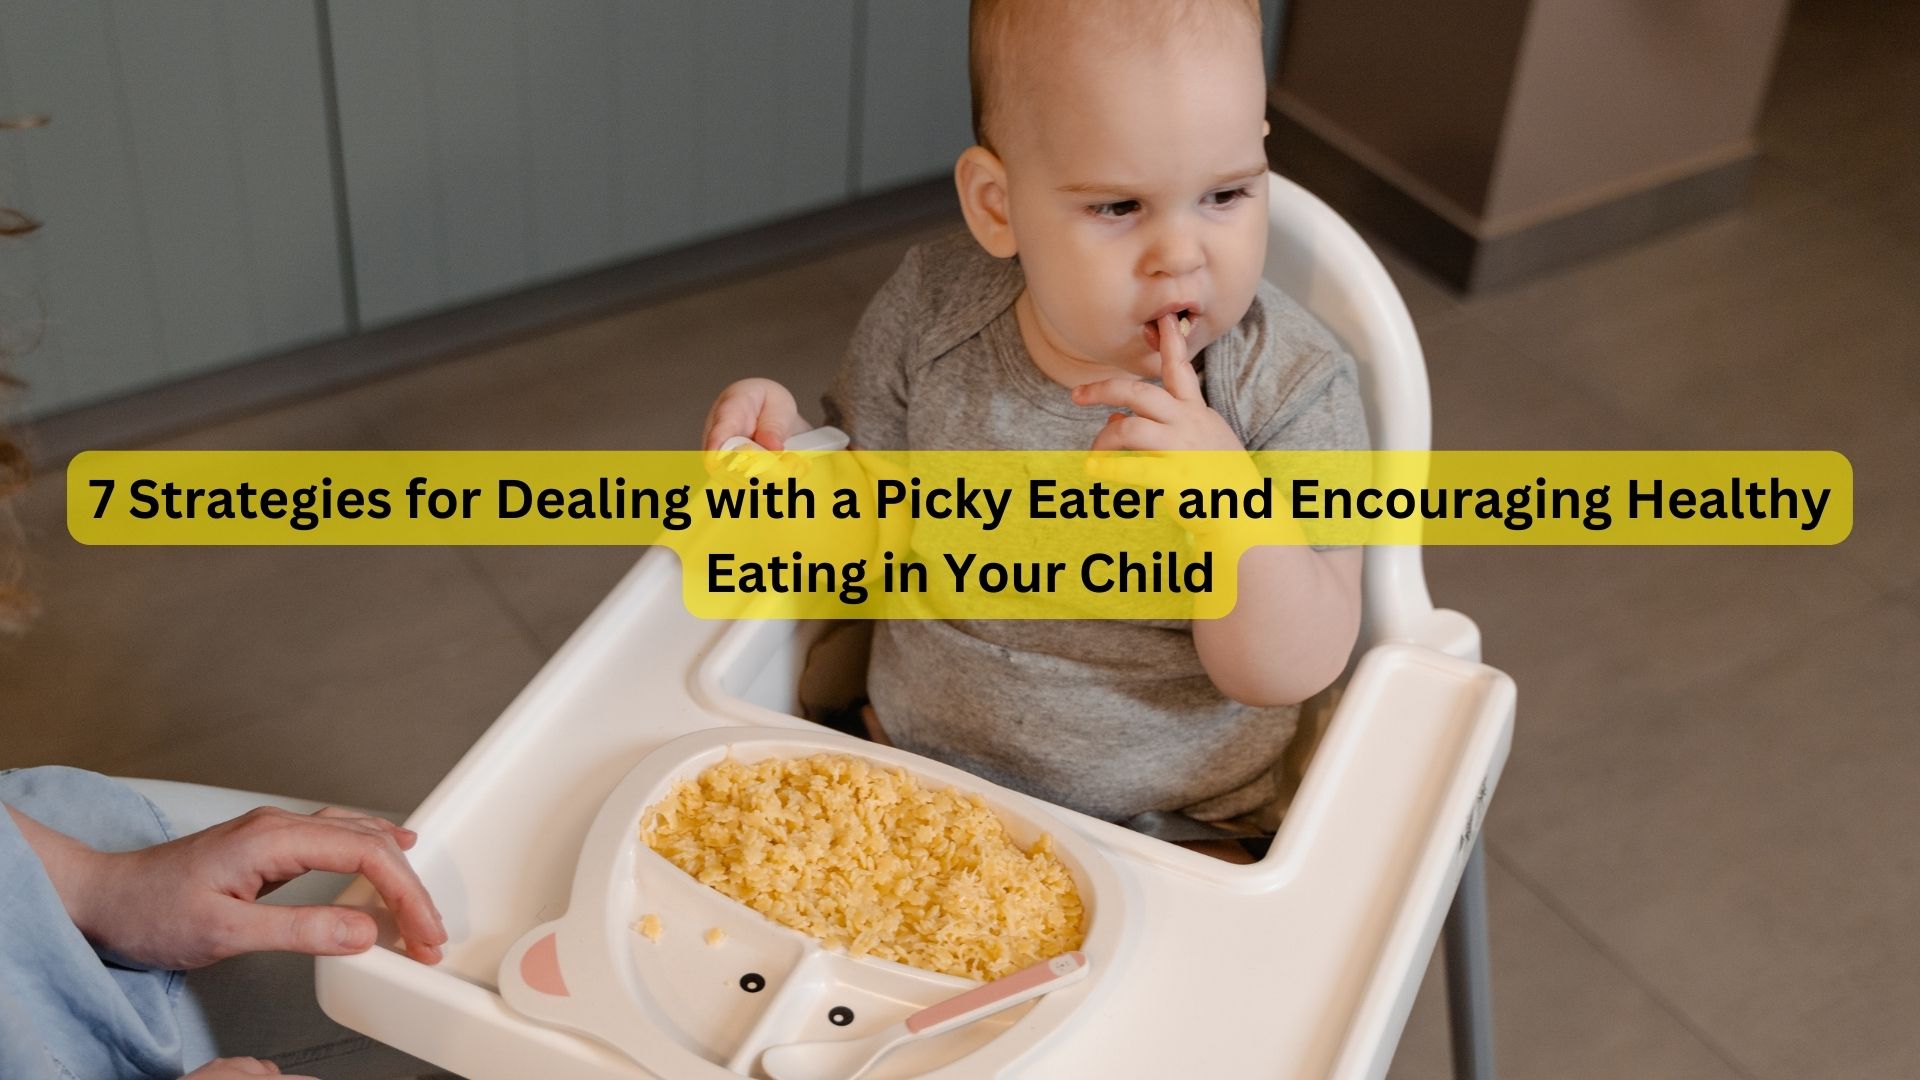 7 Strategies for Dealing with a Picky Eater and Encouraging Healthy Eating in Your Child